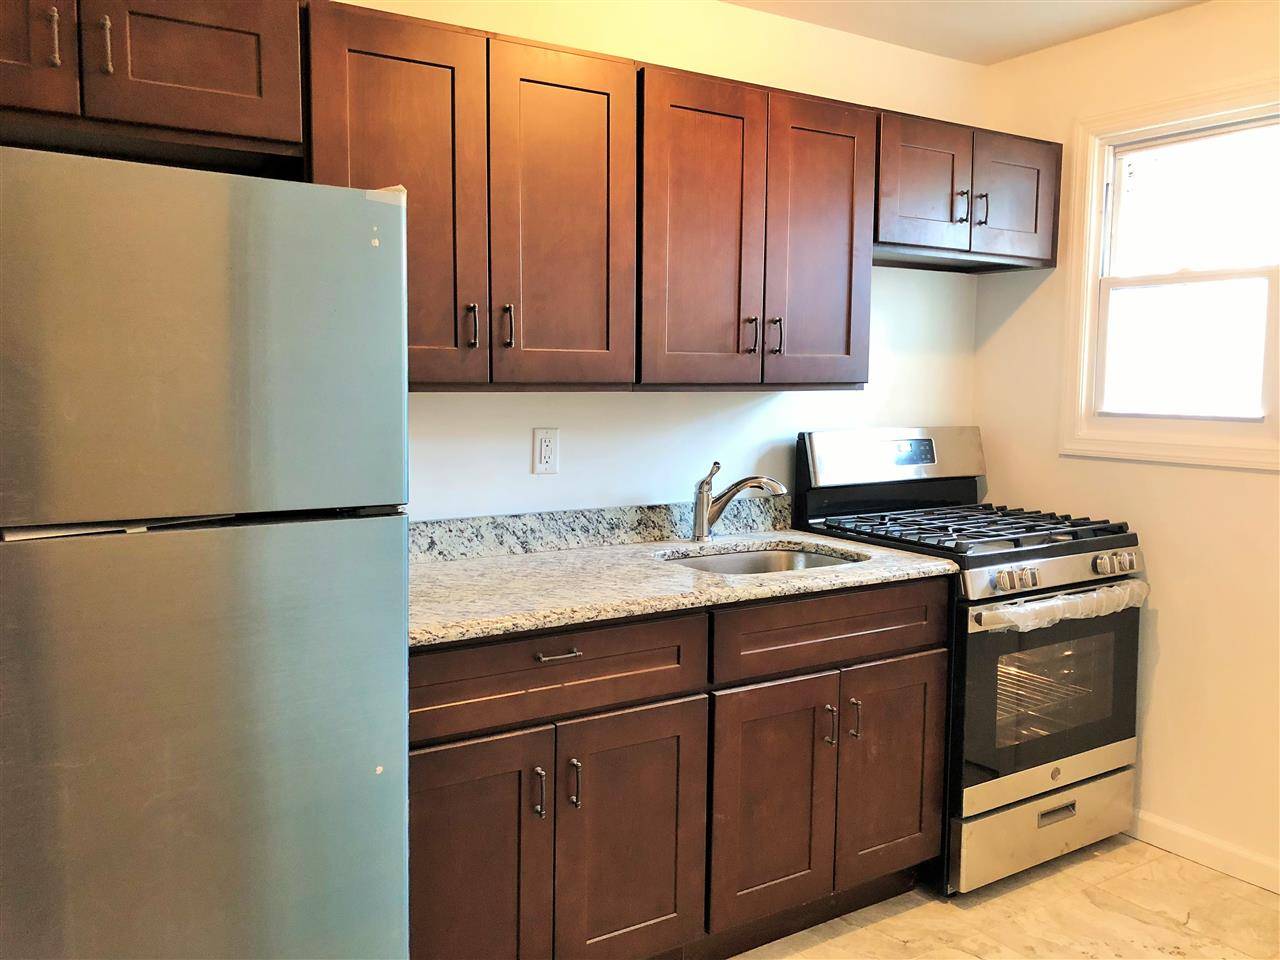 NEWLY RENOVATED 2BR WITH PRIVATE BACKYARD - 2 BR New Jersey